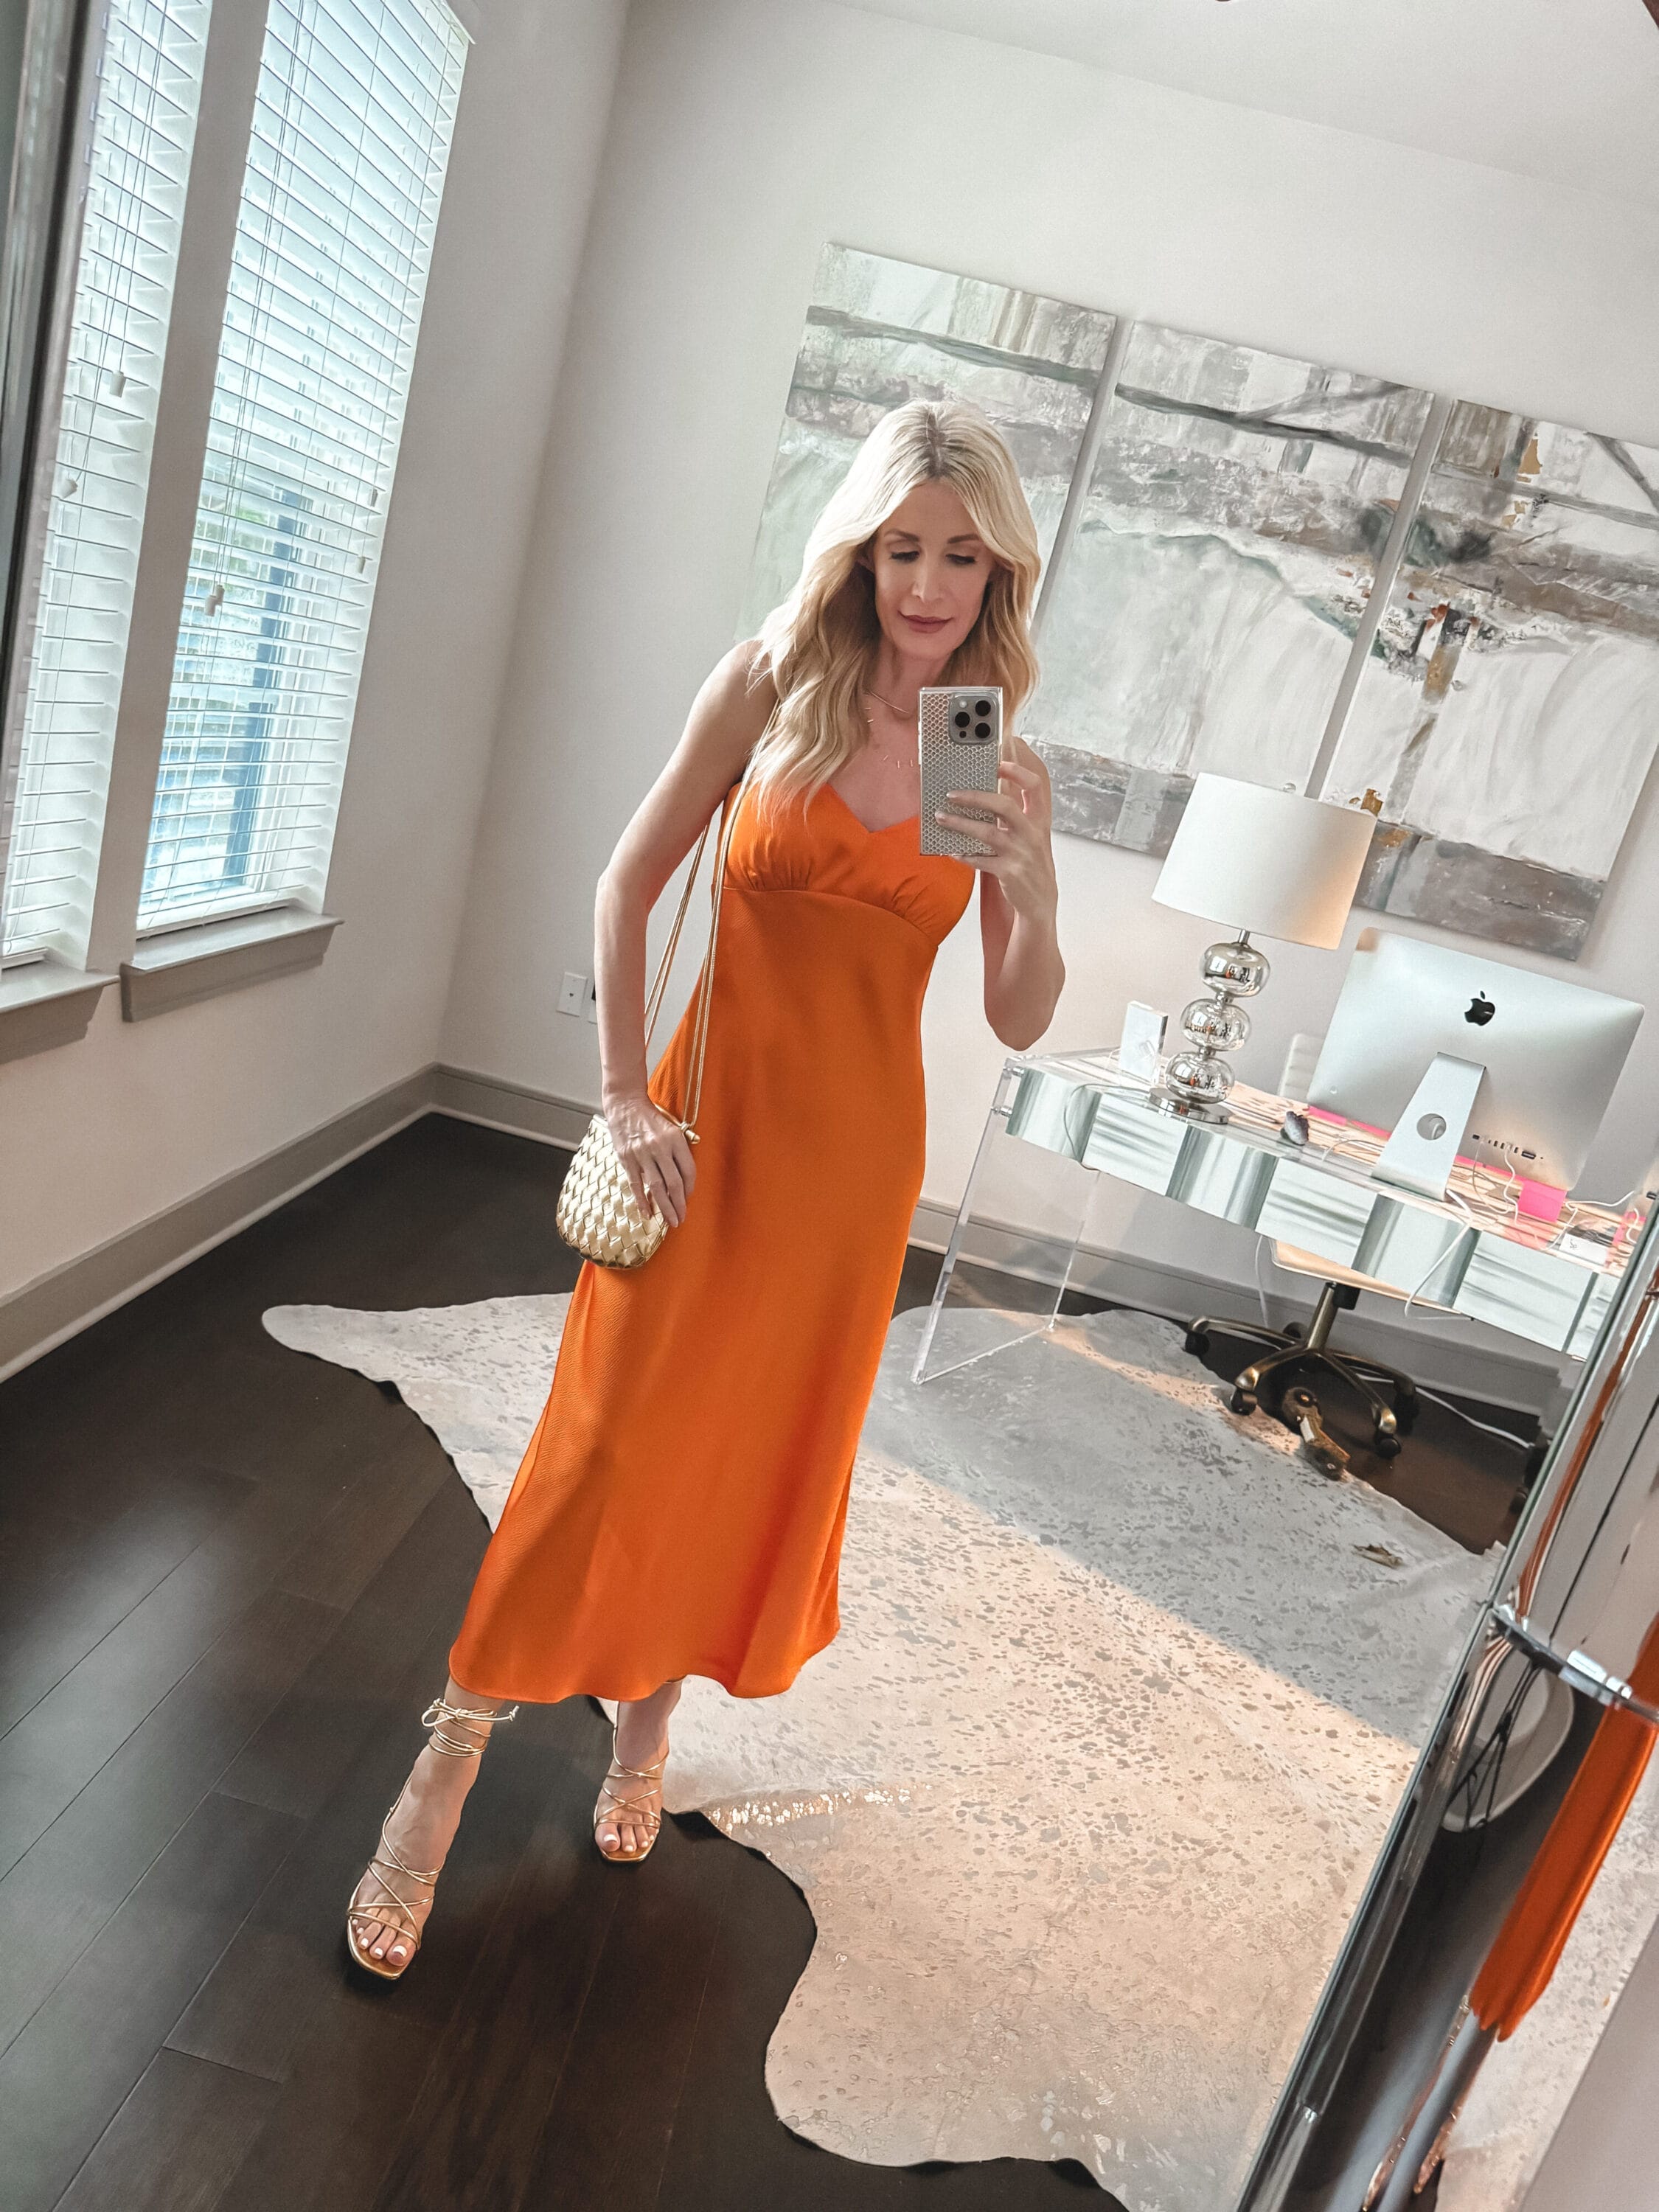 Dallas fashion blogger for women over 40 wearing an orange slip dress as an example of under $50 spring wardrobe essentials.